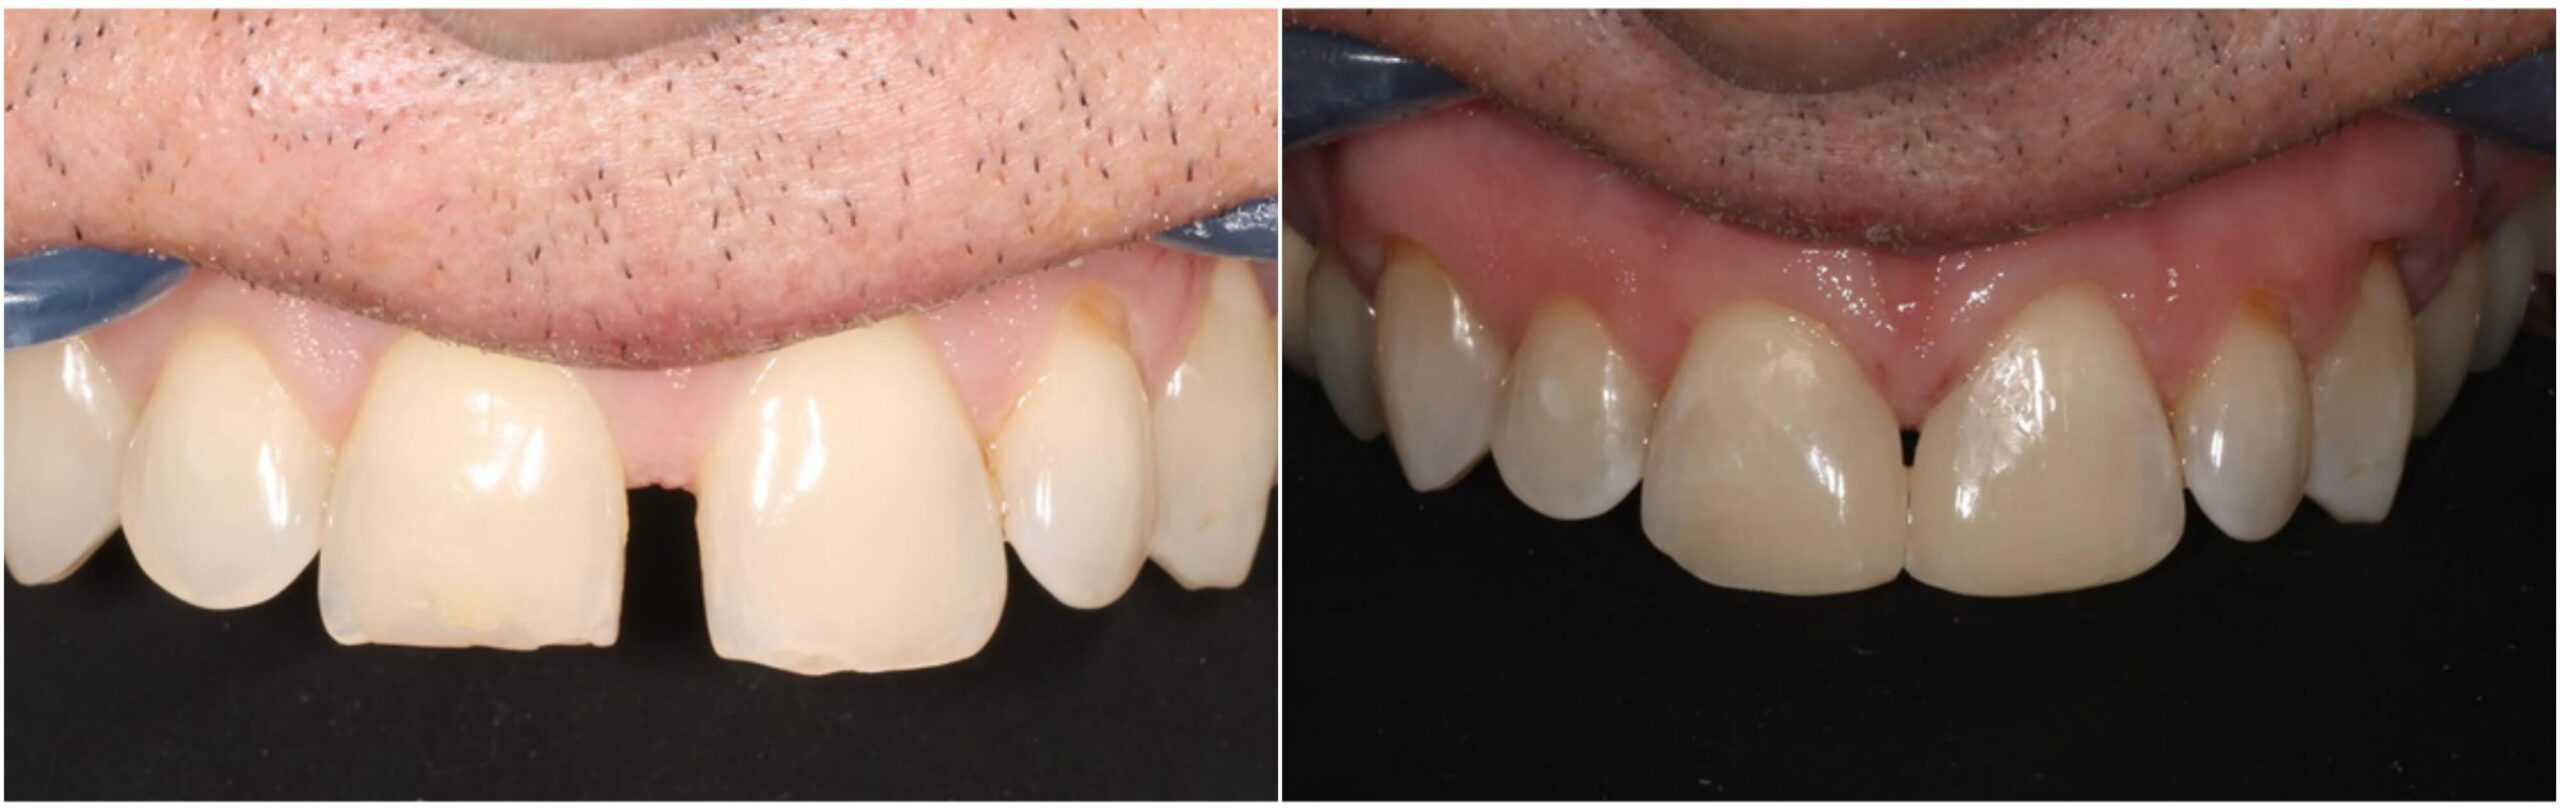 diastema before and after